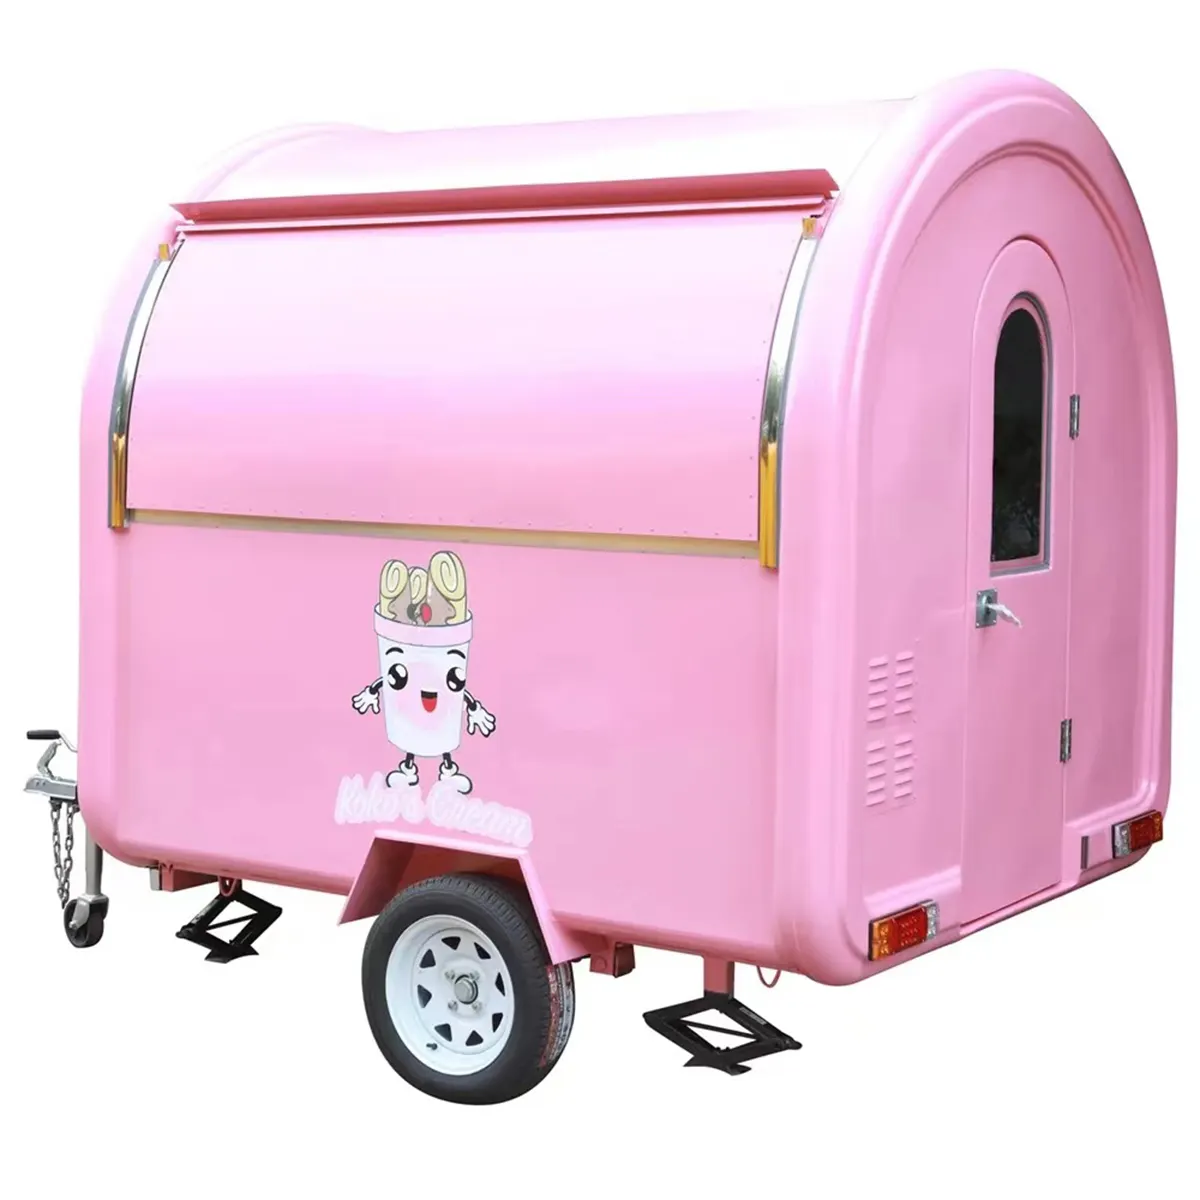 Oucci Henan Camp Tune Fiberglass Small Electric Cheapest Food Trailers With Car Sale